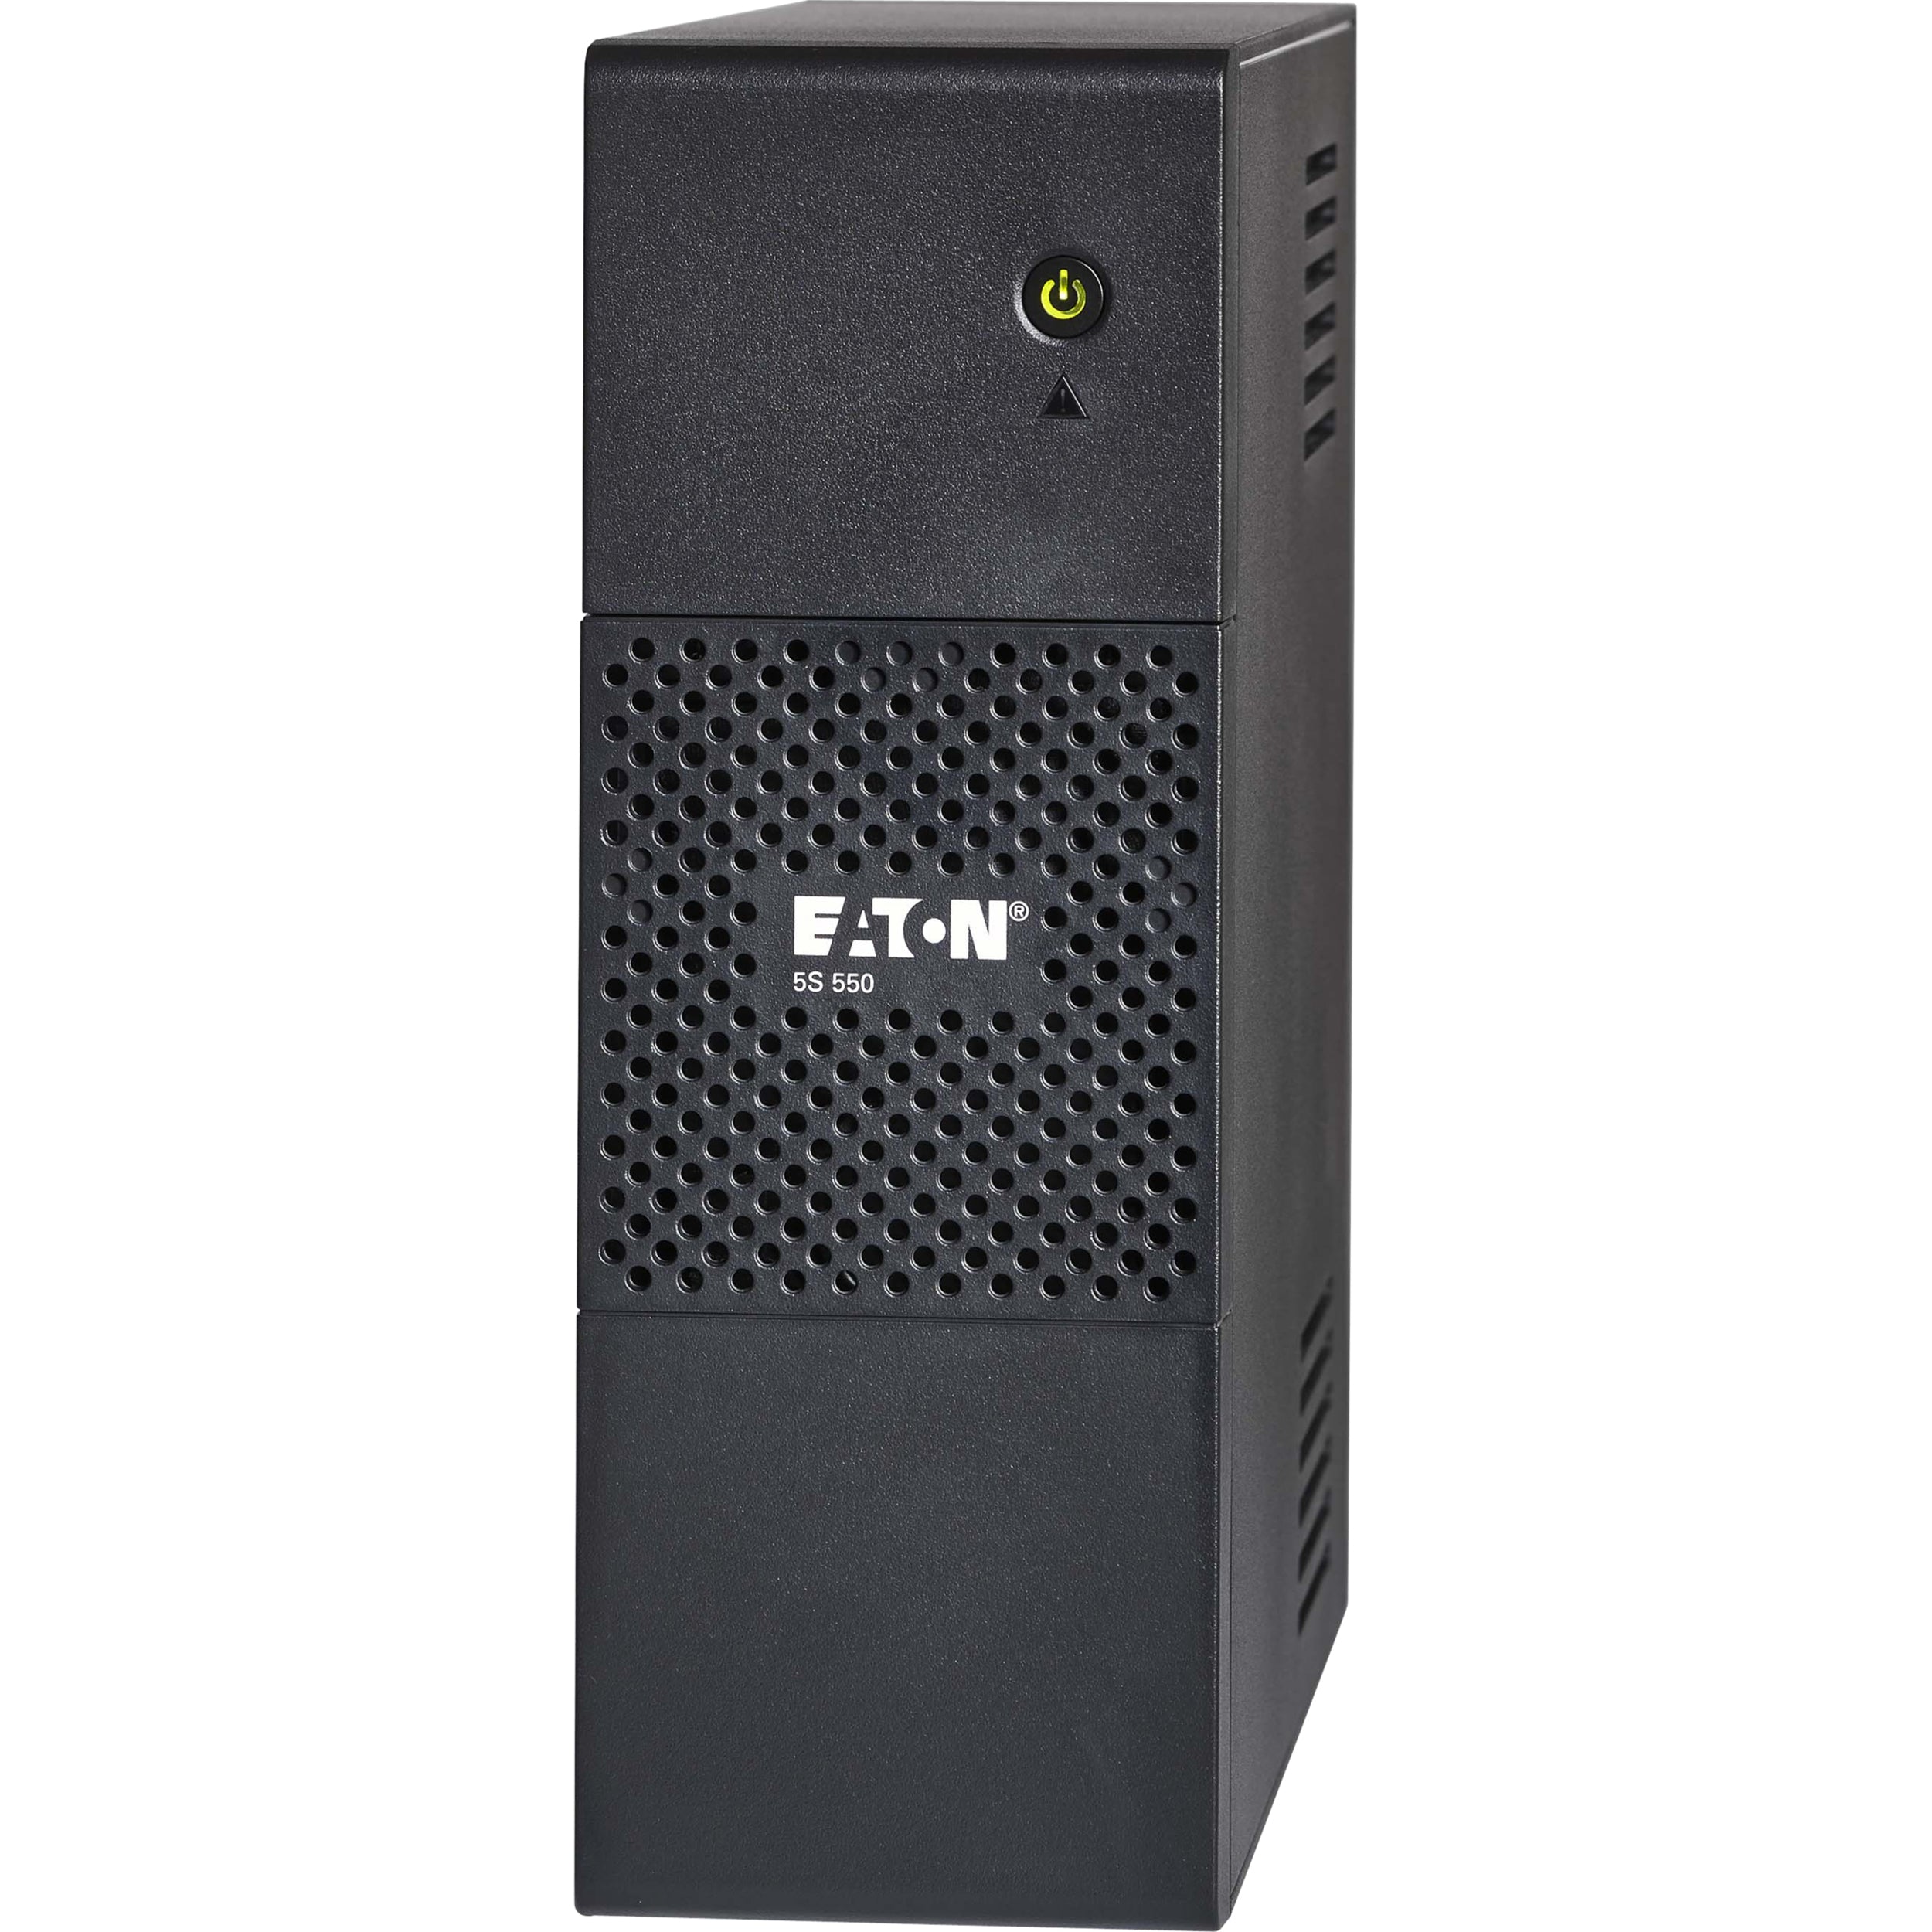 5S550AU - Eaton 5S 550VA Tower UPS - Tower - 4 Minute Stand-by - 230 VAC Input - 230 VAC Output -